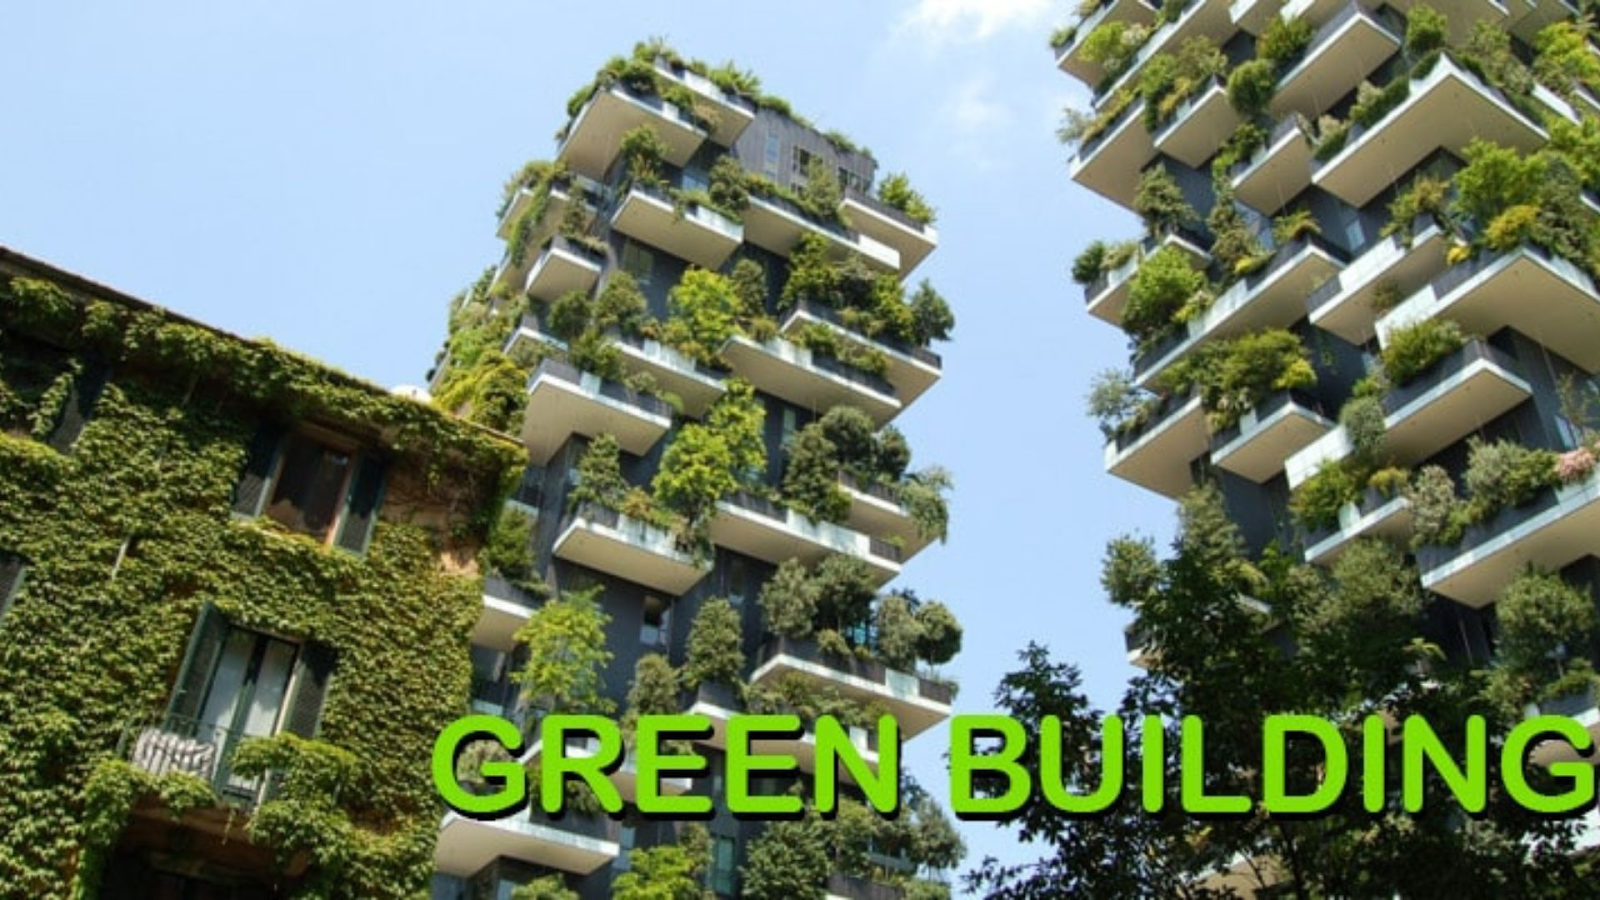 An eye-catching green structure that uses energy-efficient technology and ecological design